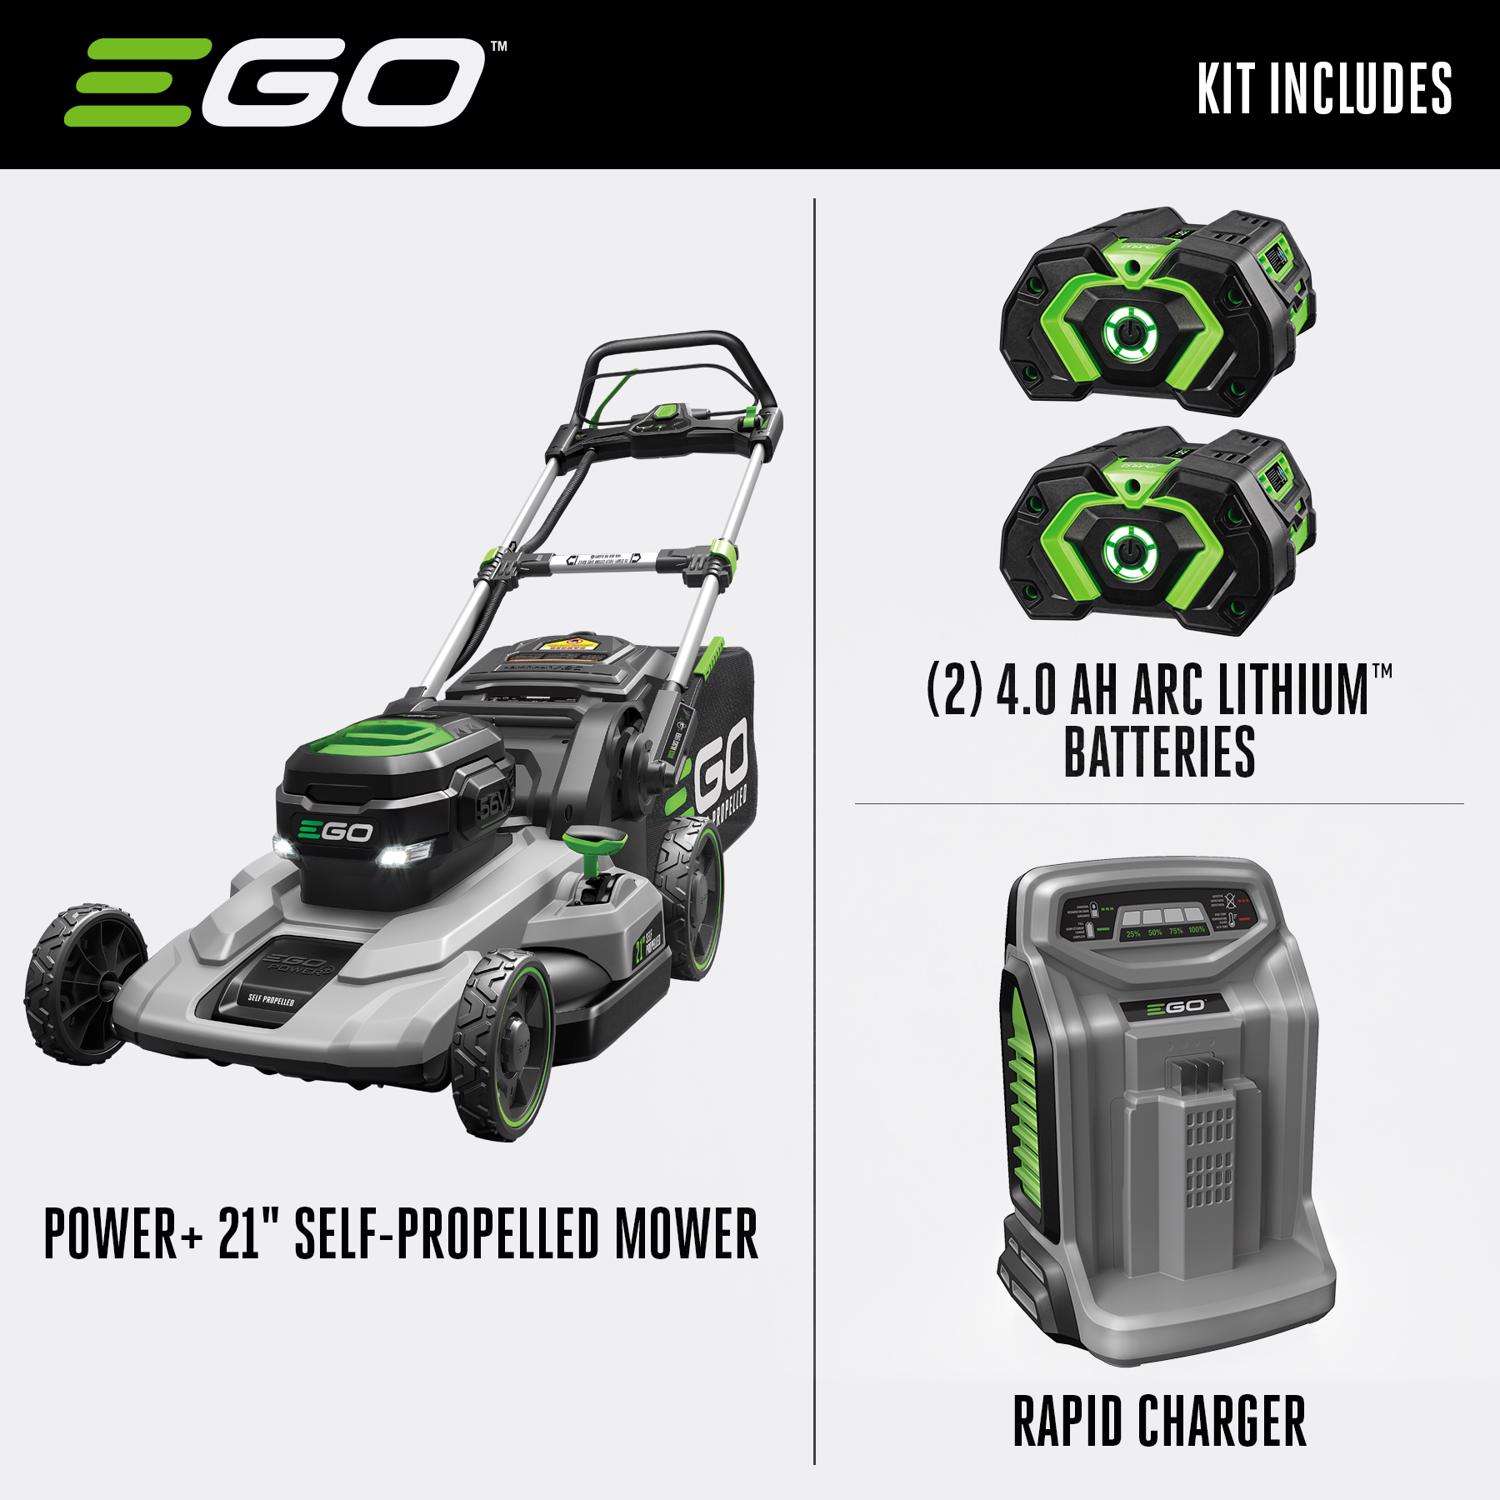 EGO Power+ 21 in. 56V Lawn Mower Kit (2 Batteries & Charger) - Ace